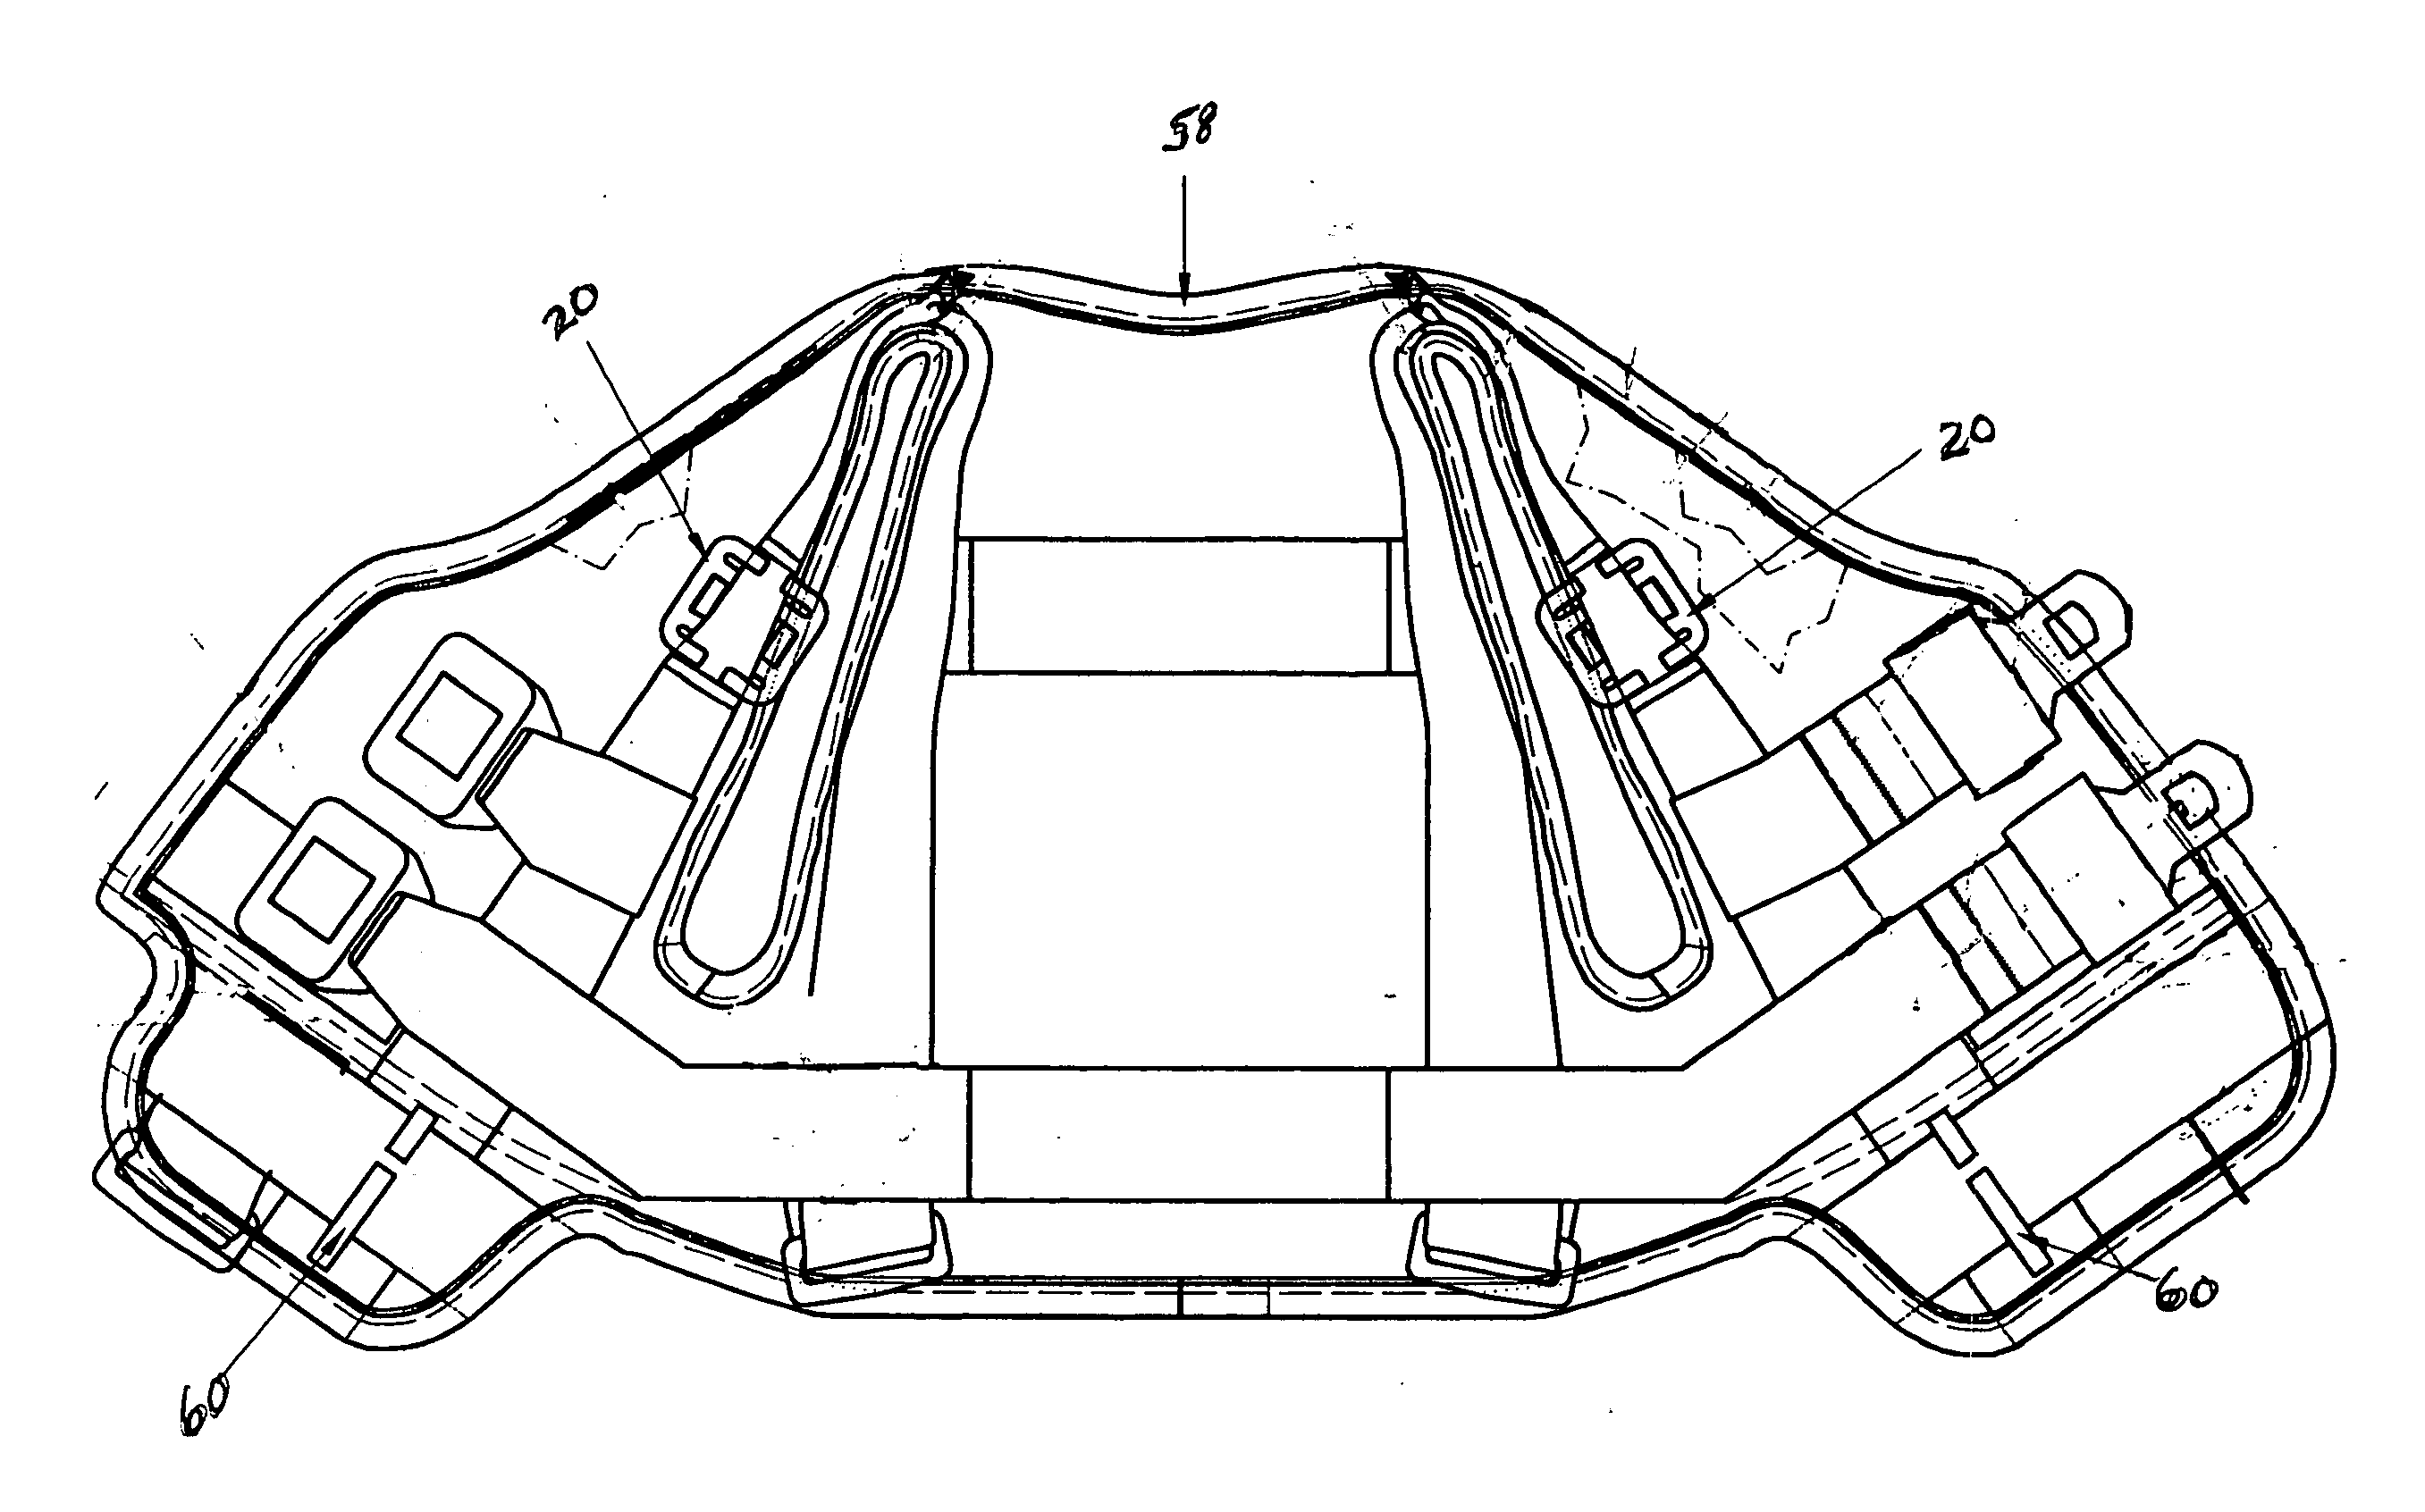 Deformable restraint guide for use with child restraint system